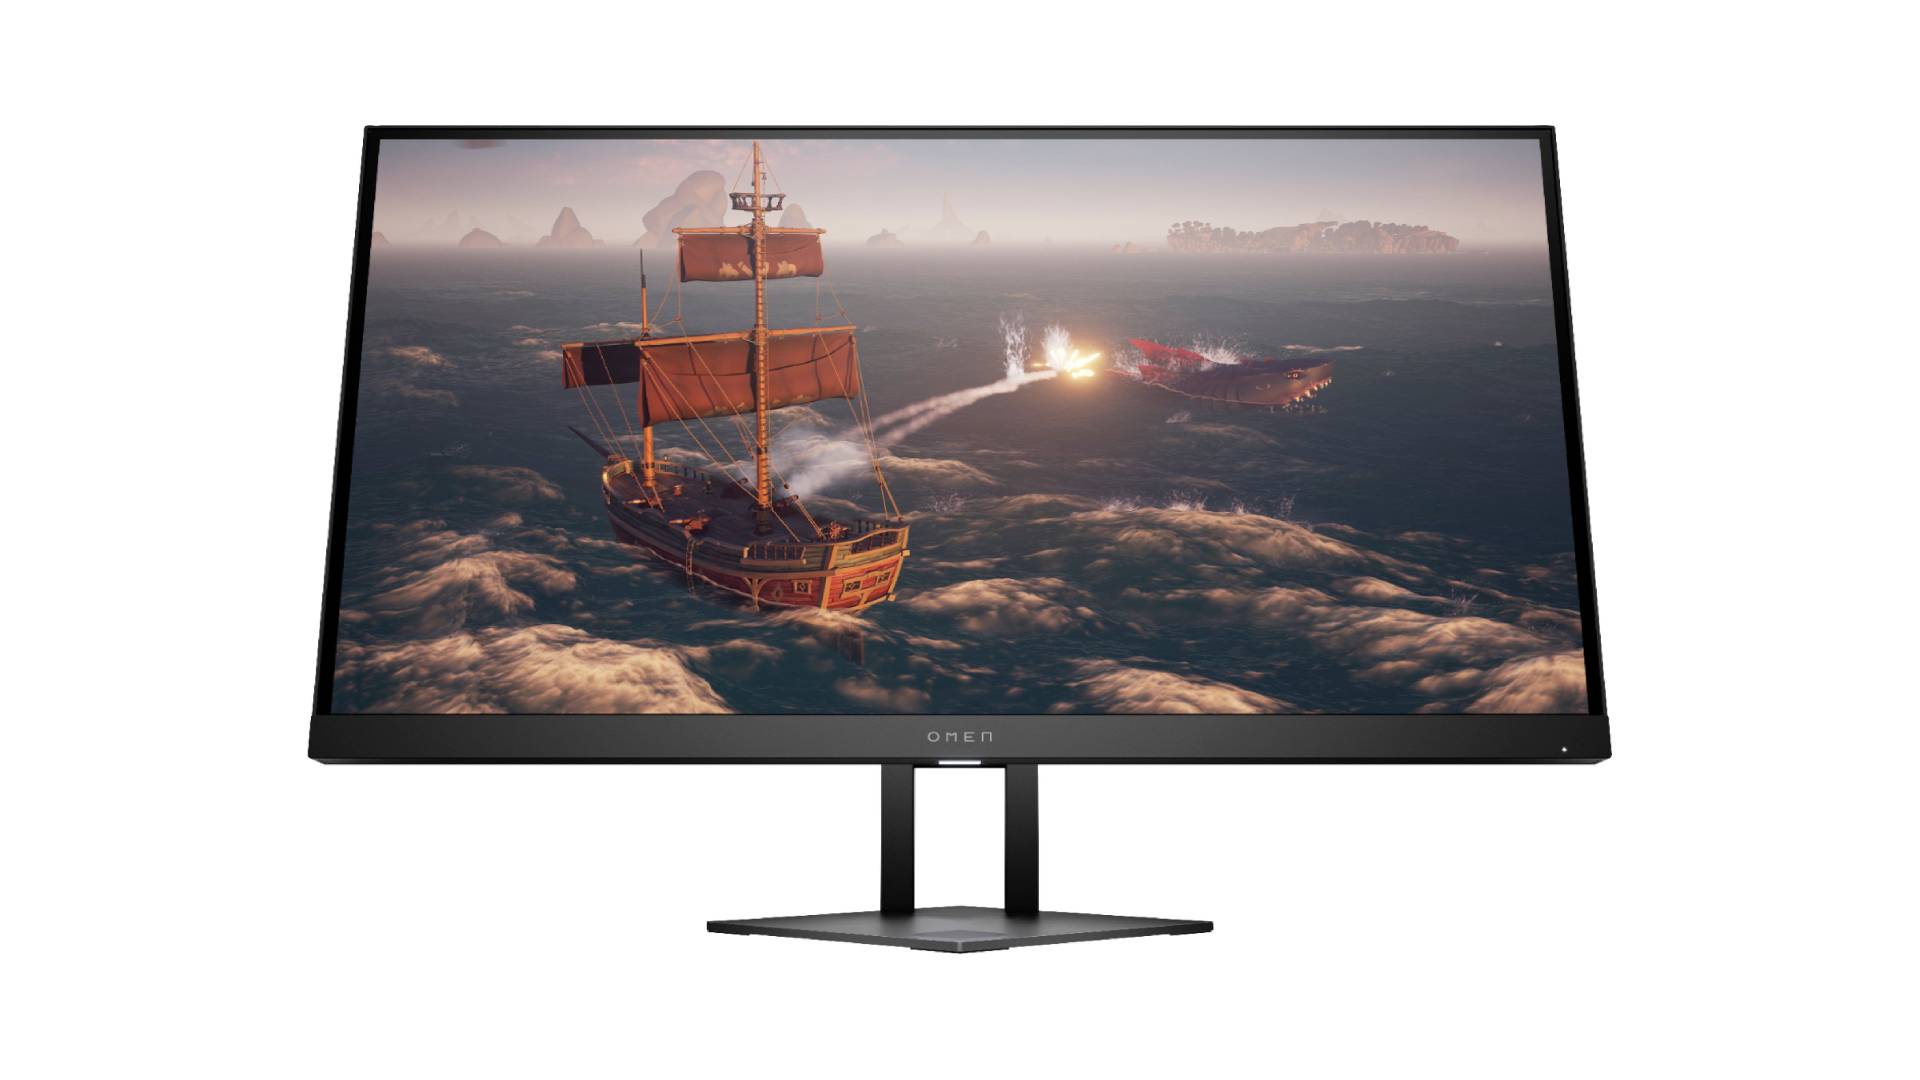 The HP Omen 27i 1440p gaming monitor has a 165Hz IPS panel that’s 31% cheaper